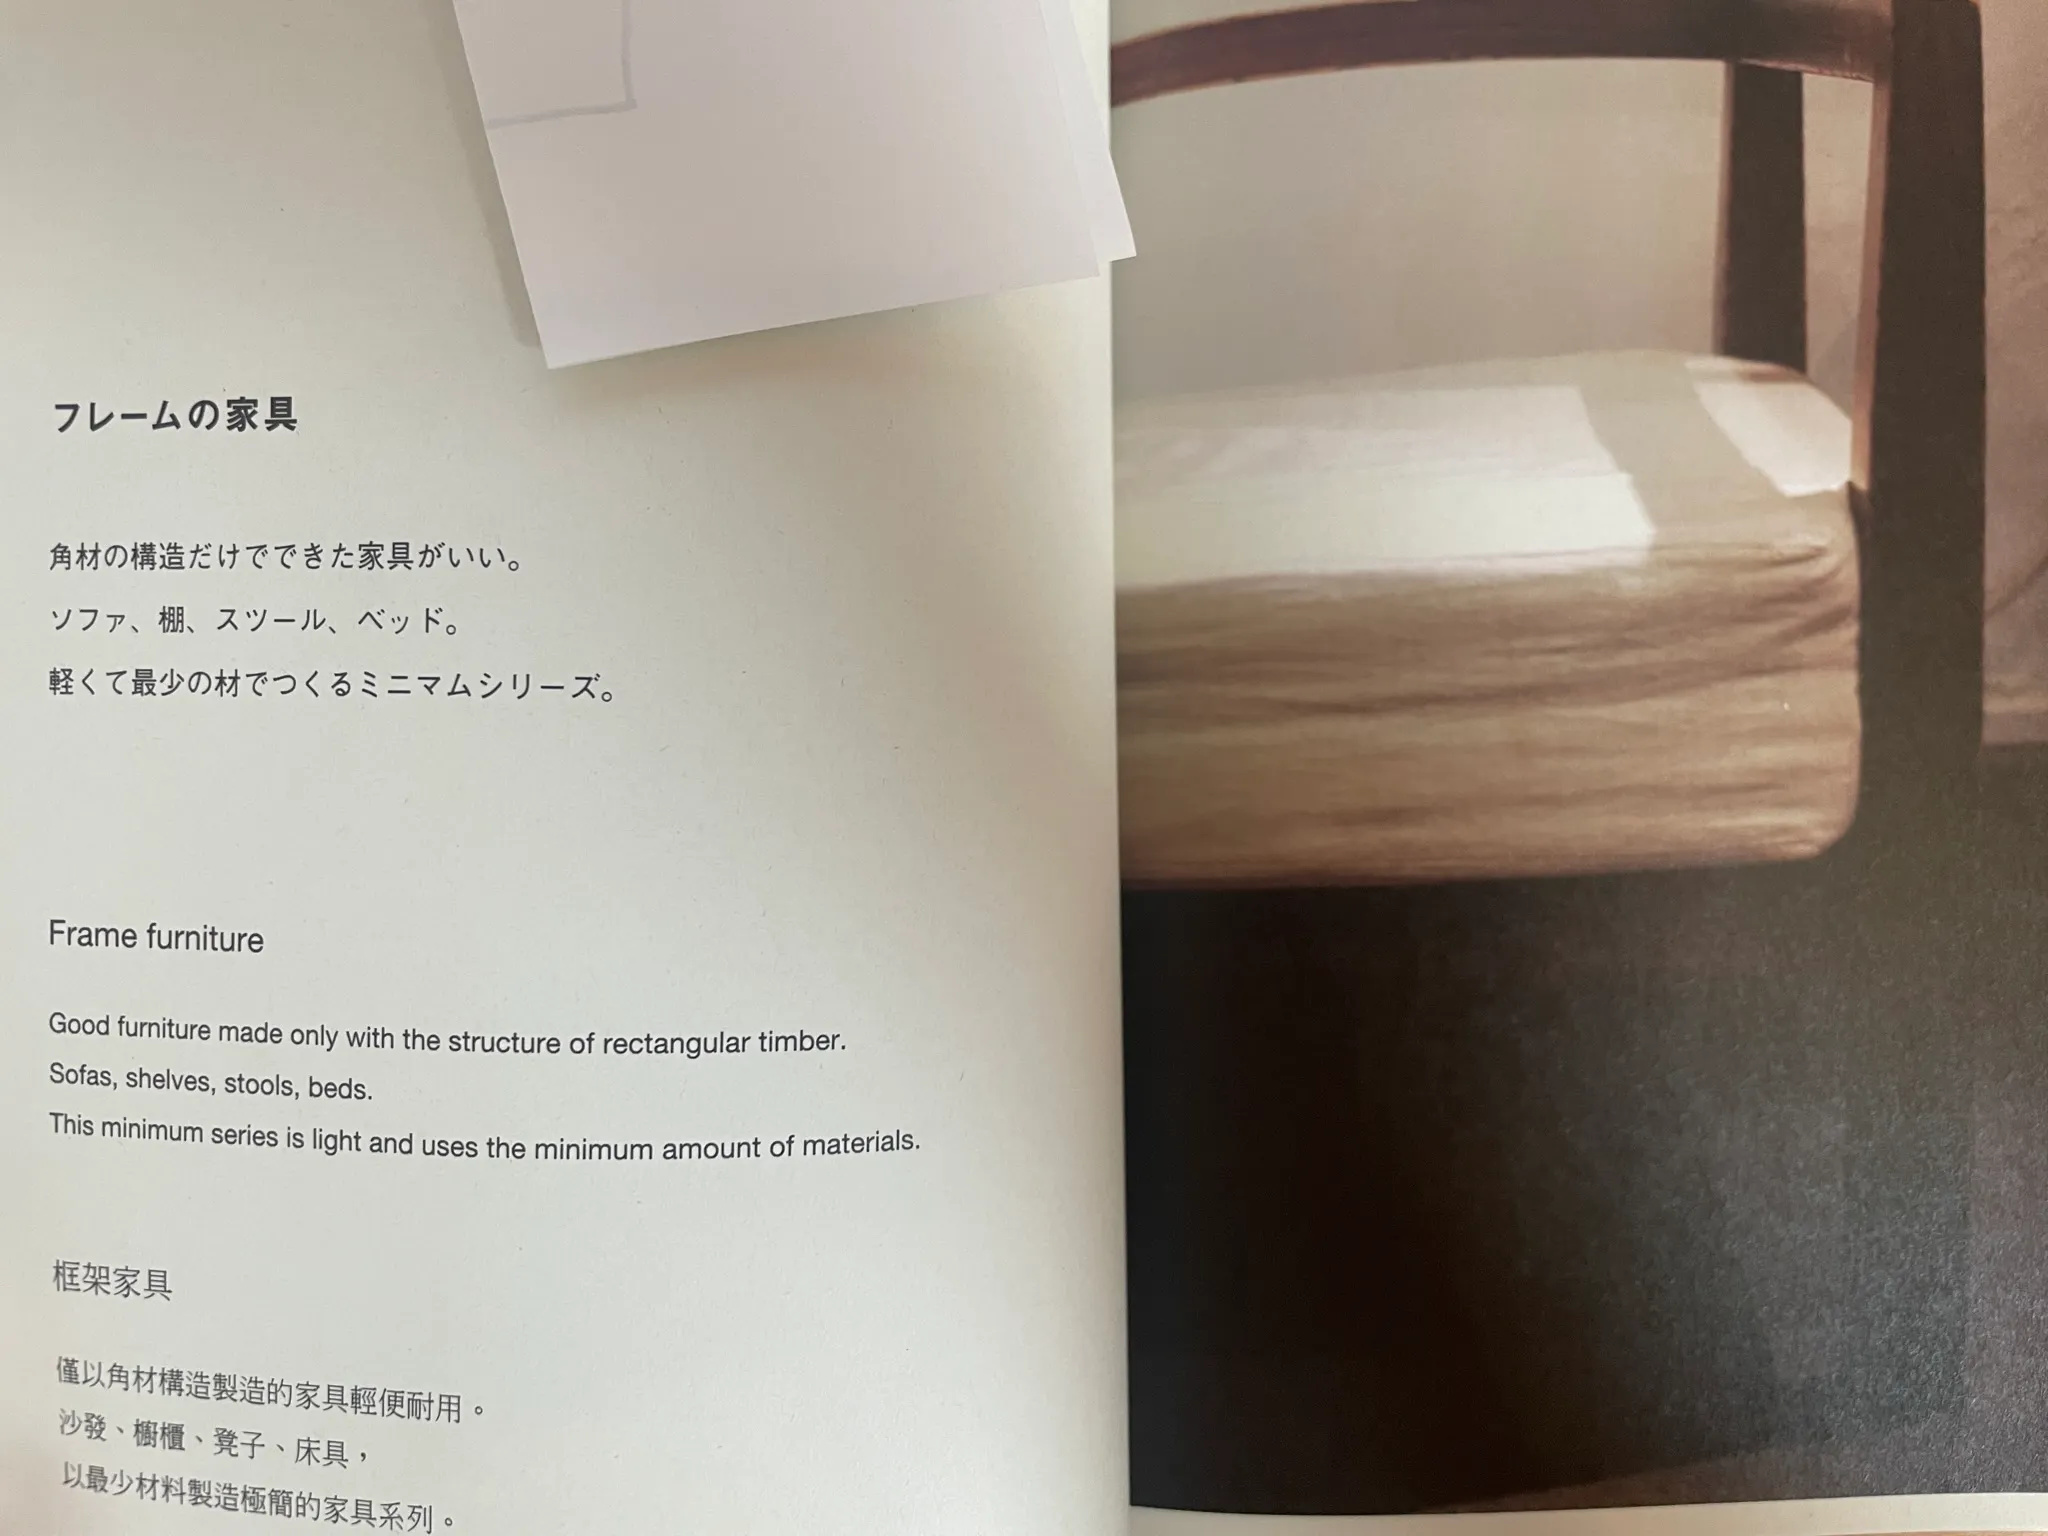 A photograph of favorite moment from Found Muji. Well-proportioned wooden frame furniture.